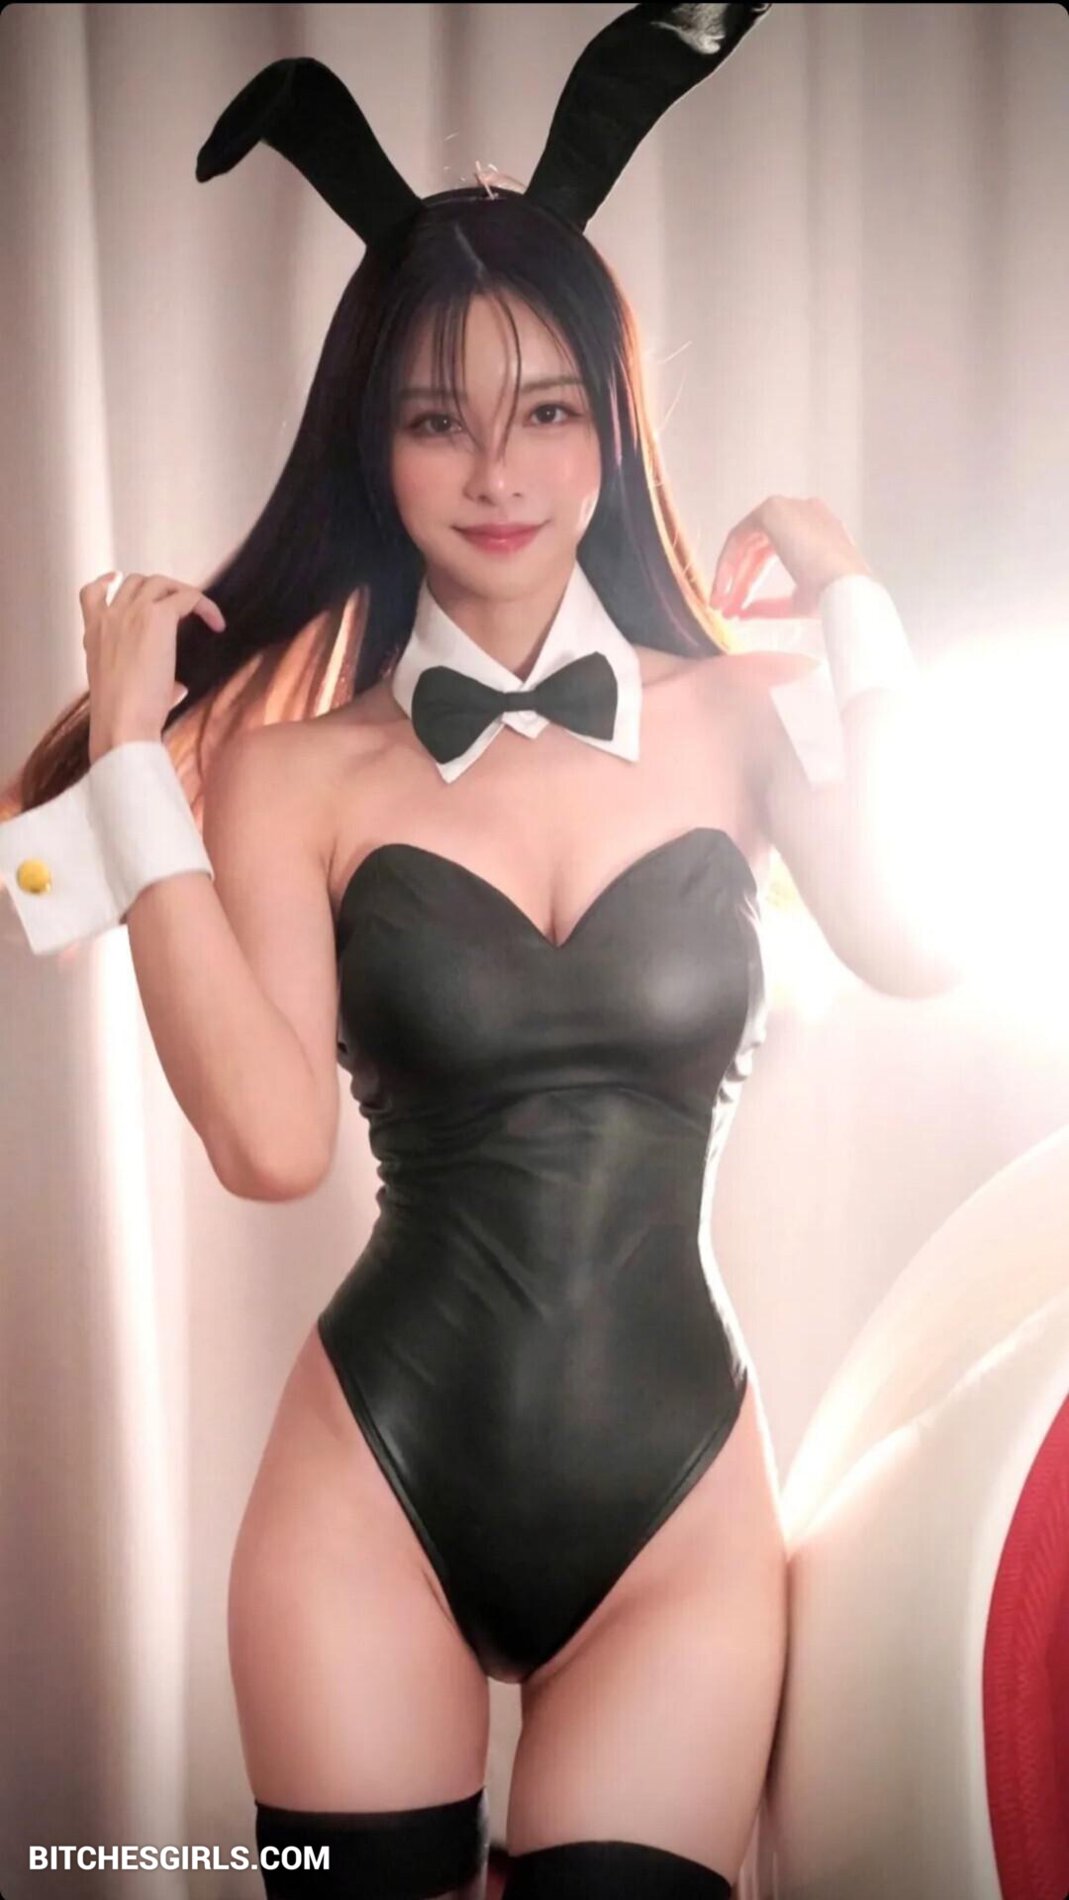 Costume sexy lee - Real Naked Girls